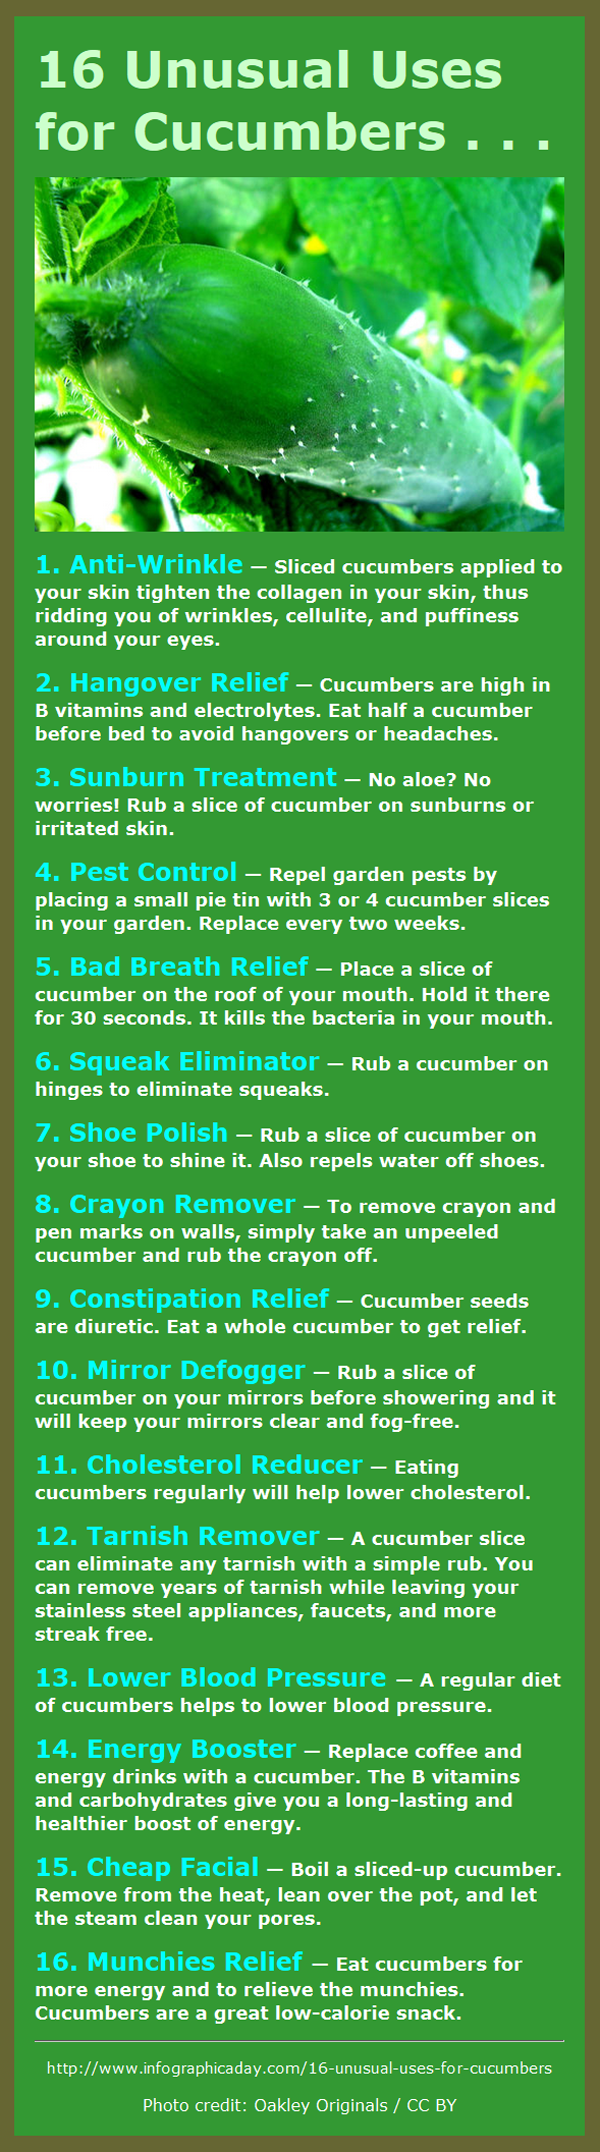 16 Uses for Cucumbers